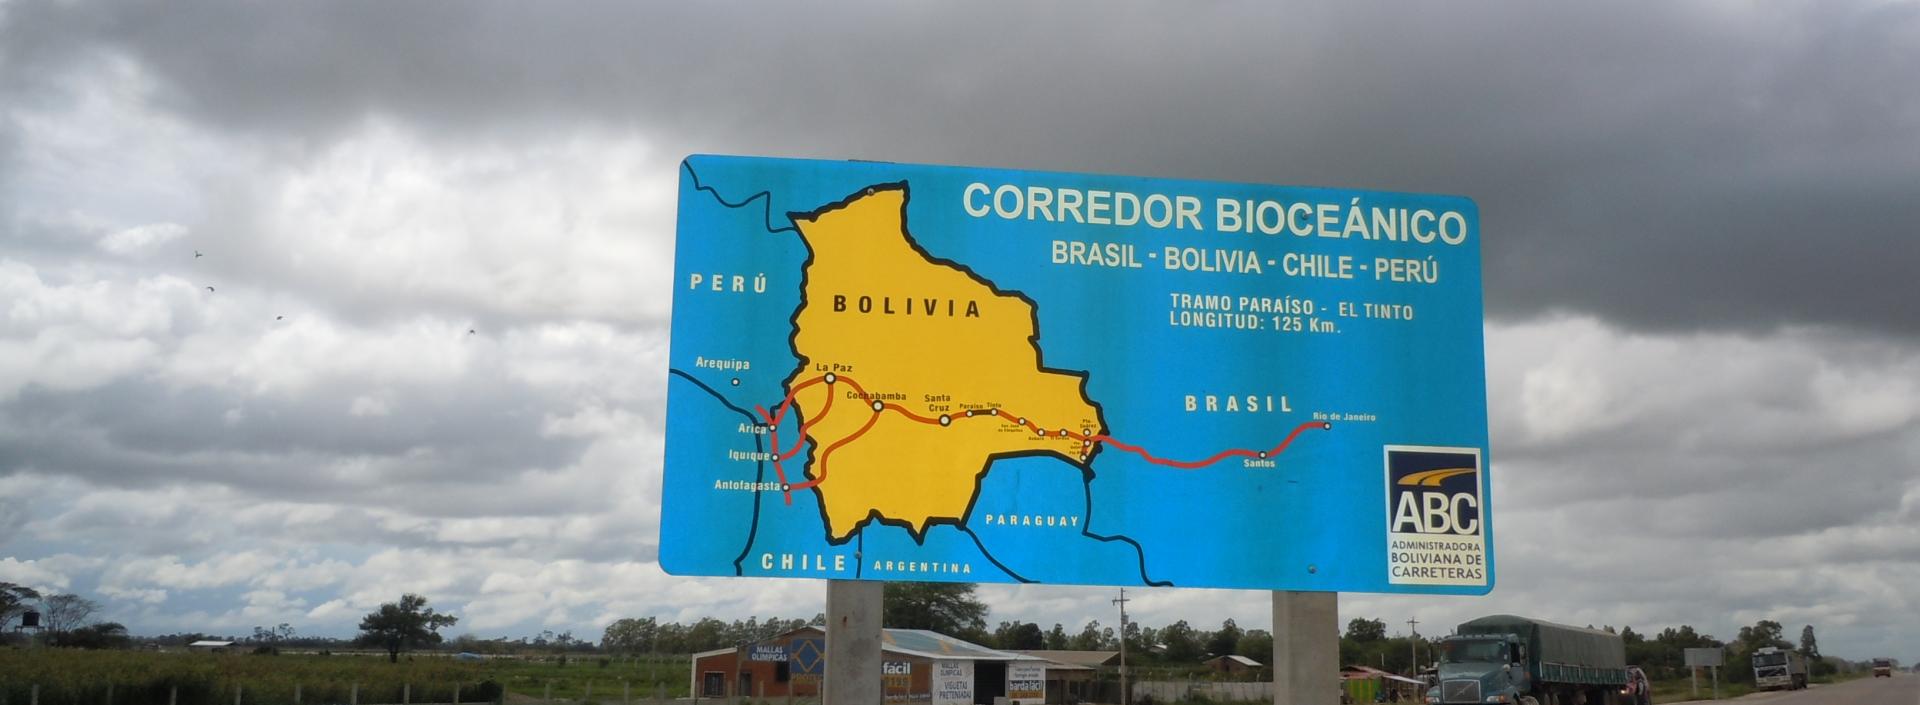 Presidents of Bolivia and Brazil consider reactivating the bioceanic rail corridor. (Photo internet reproduction)